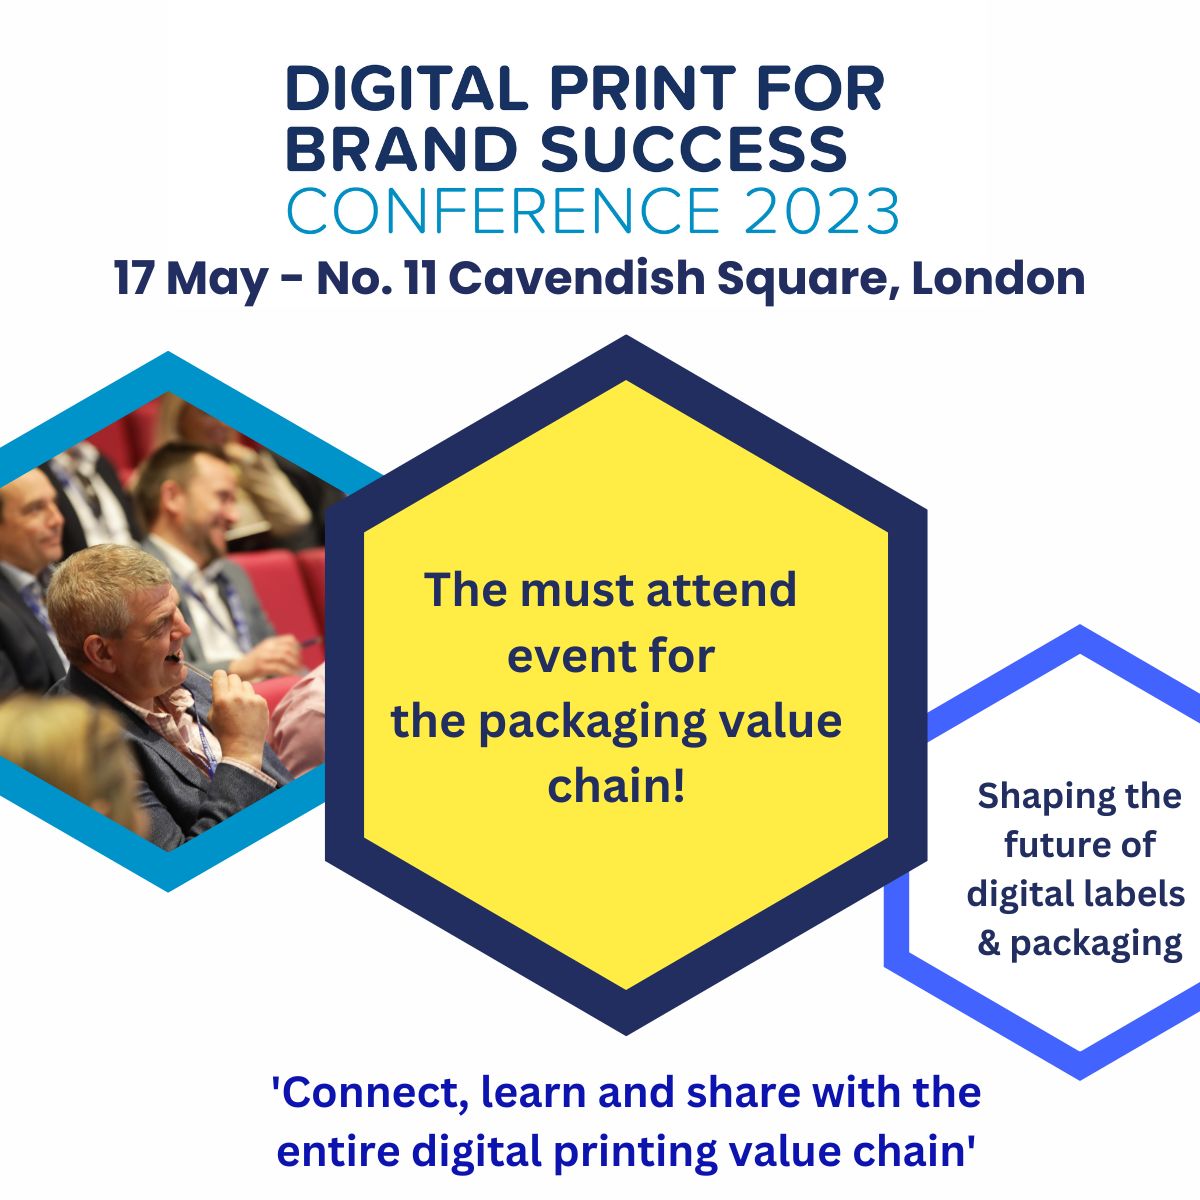 Digital Print for Brand Success Conference 2023